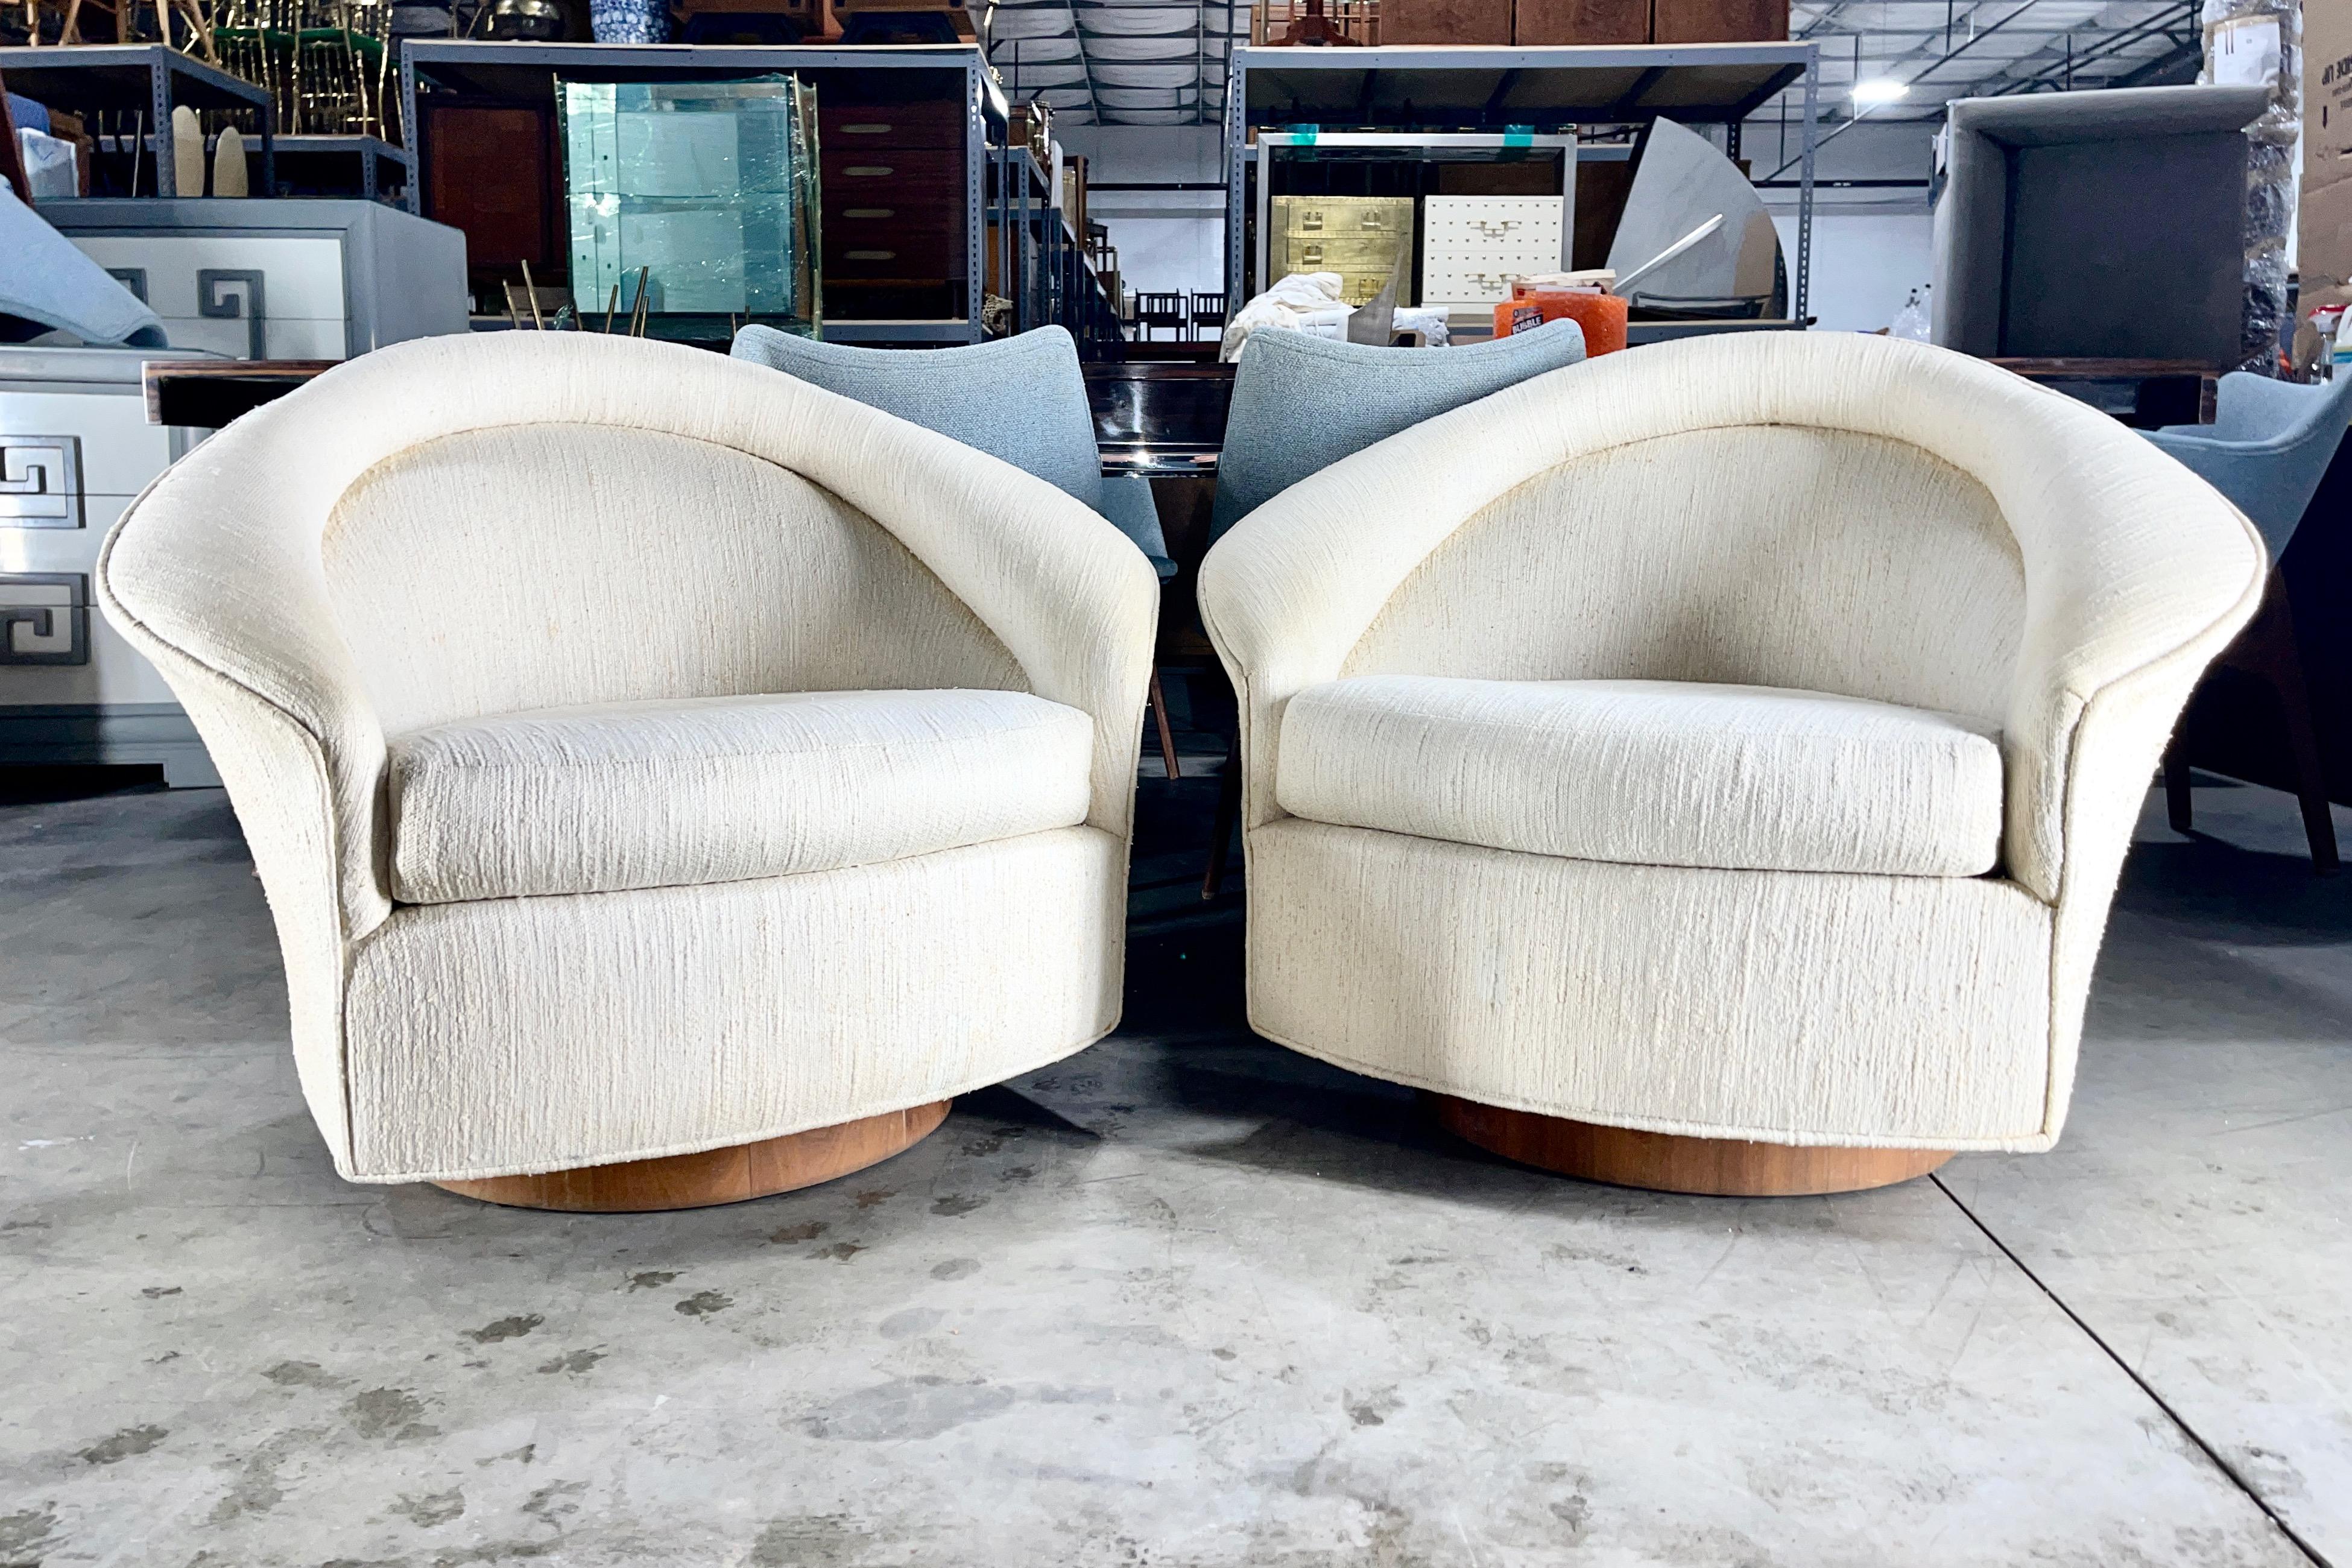 Pair of swivel rocking lounge chairs designed by Adrian Pearsall for Craft Associates which was acquired in 1969 by Lane of Alta Vista. Original Craft/Lane label present.
Distinctive sculptural arms similar to the Diamond sofa and lounge by Gio